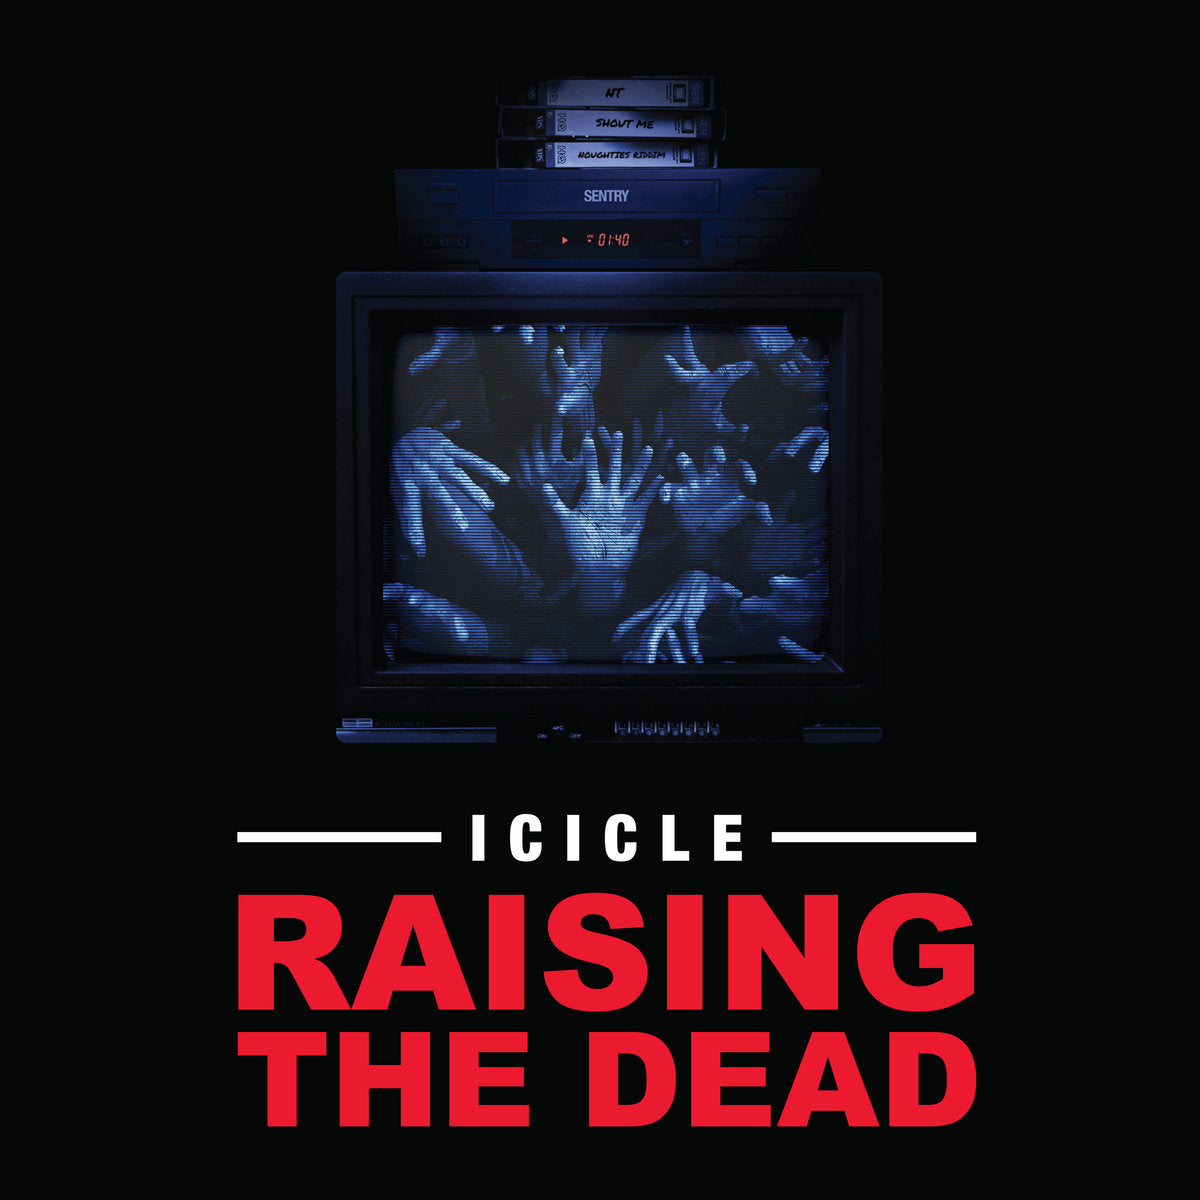 ICICLE 'RAISING THE DEAD" 2x12"